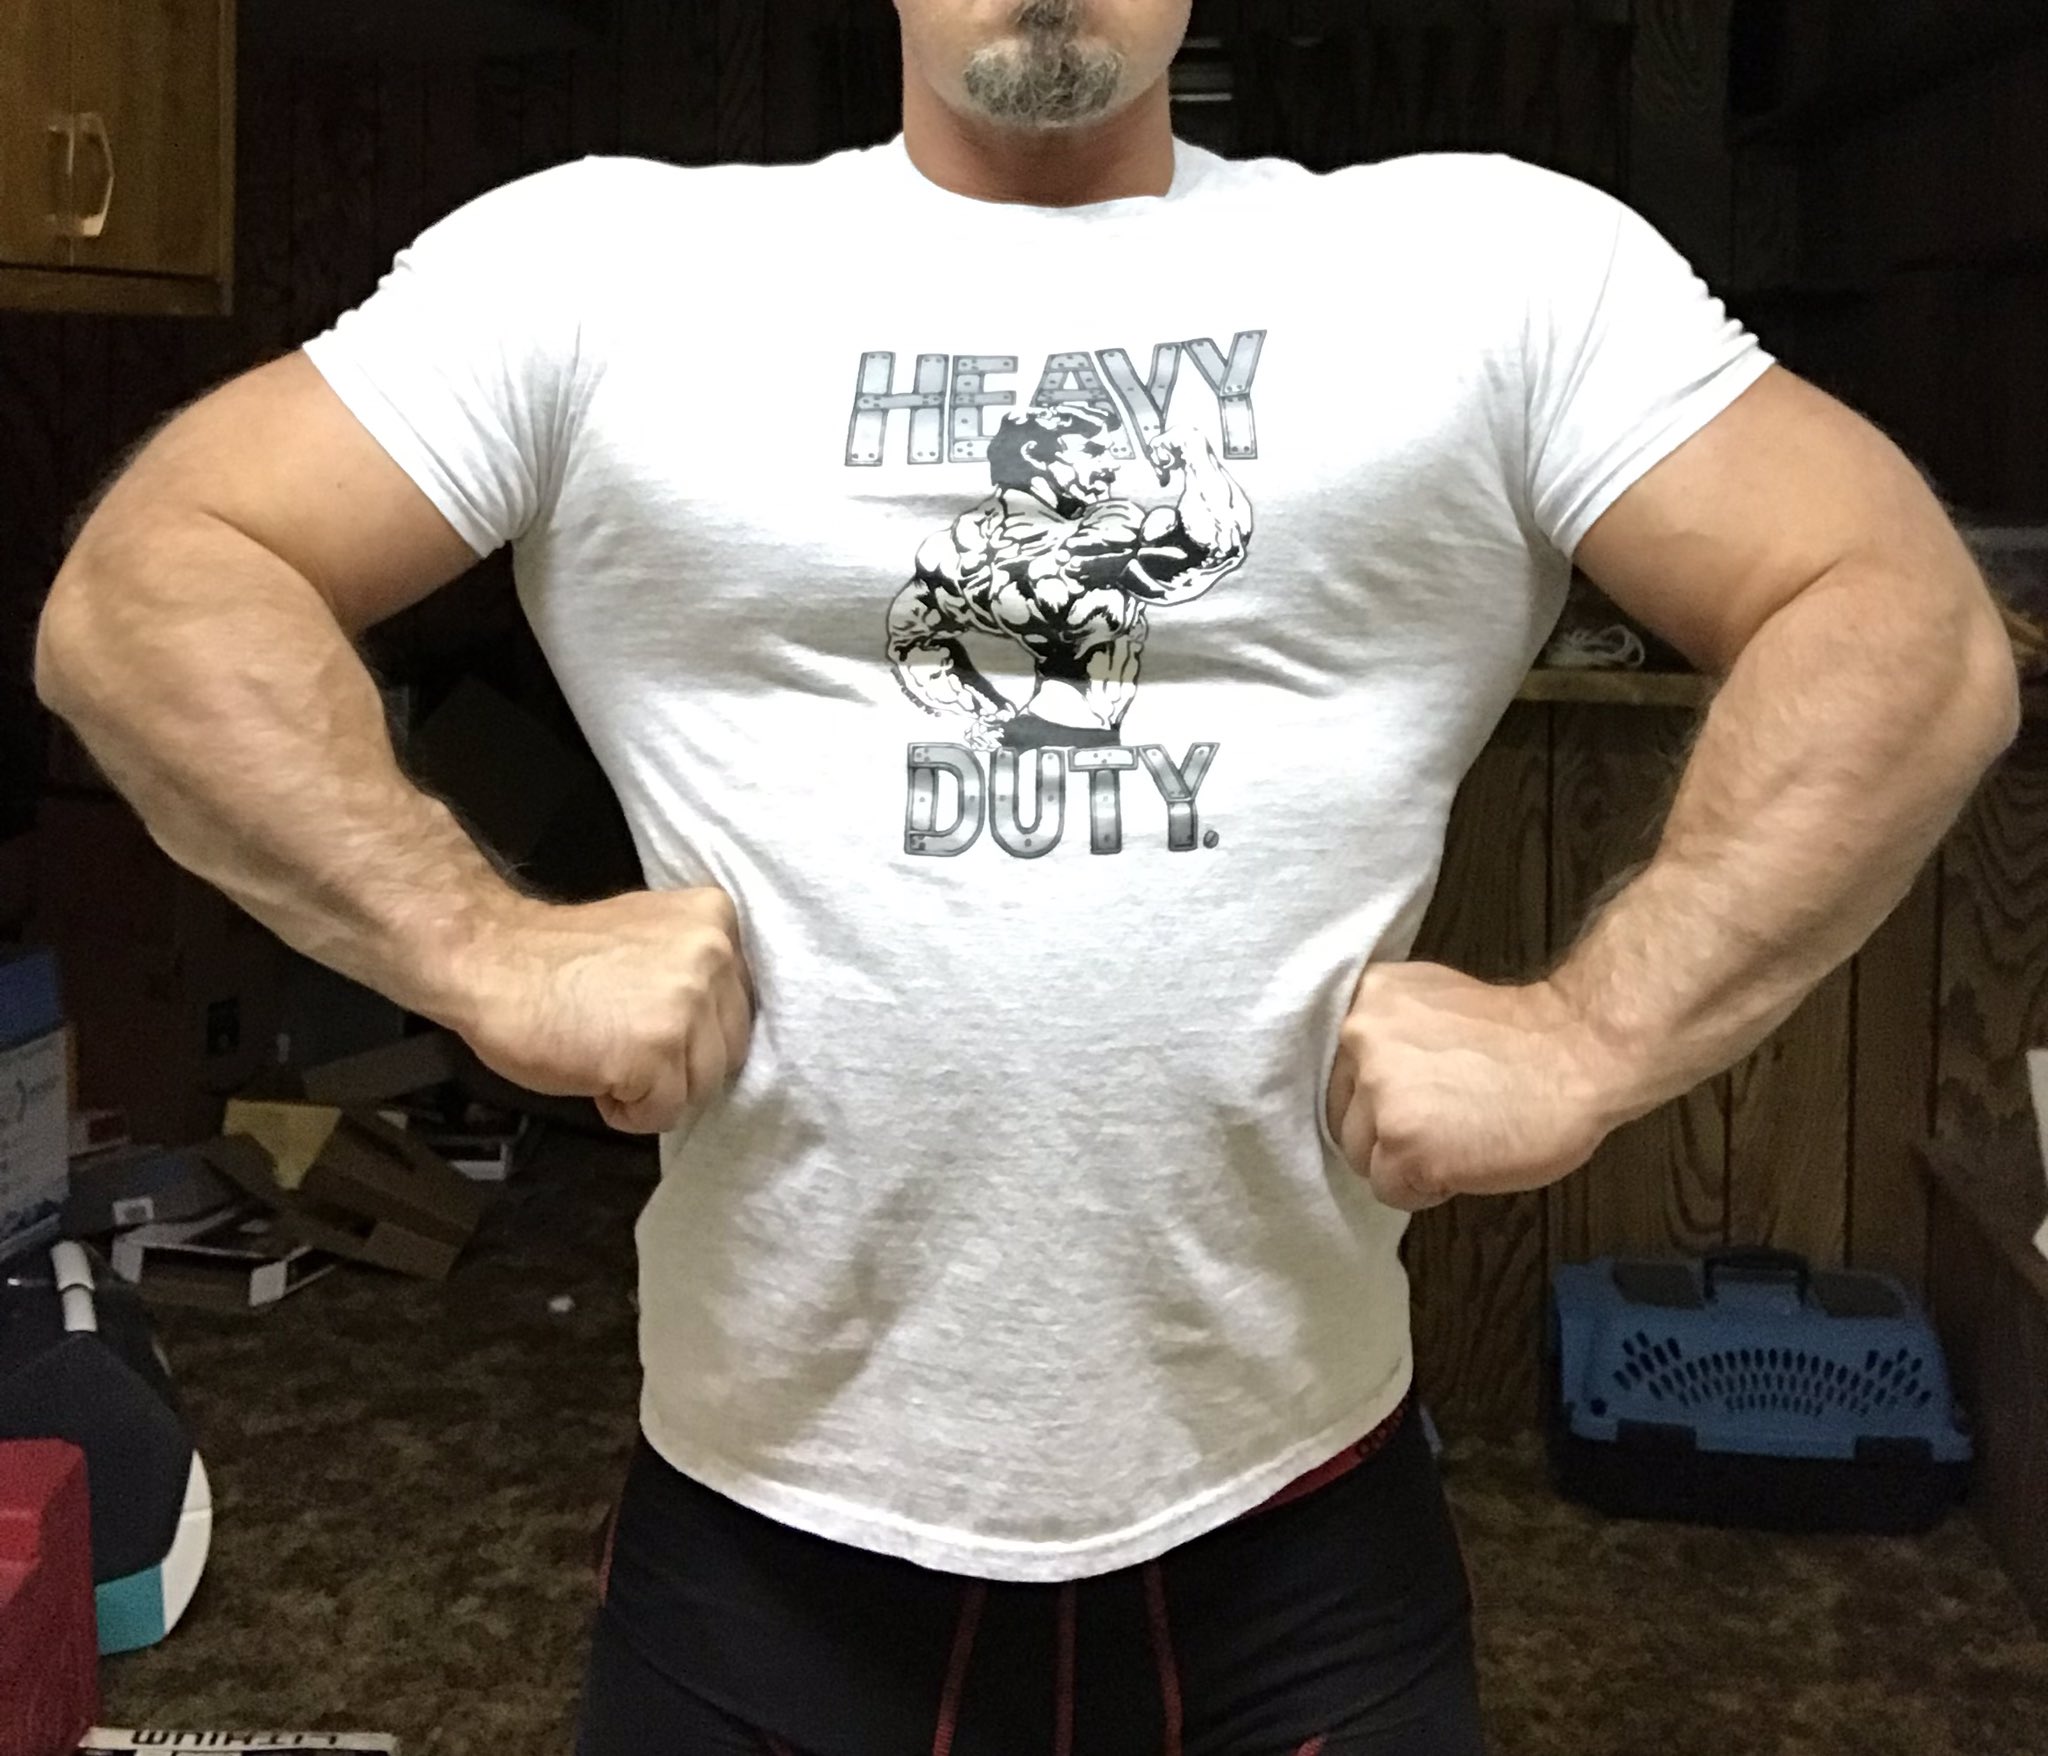 stamtavle Rusland Tog dredlifter on X: "Off work for the holidays so probably won't see polo pics  for a while. Instead I put in this awesome Mike Mentzer tee an awesome  friend for me 3-4